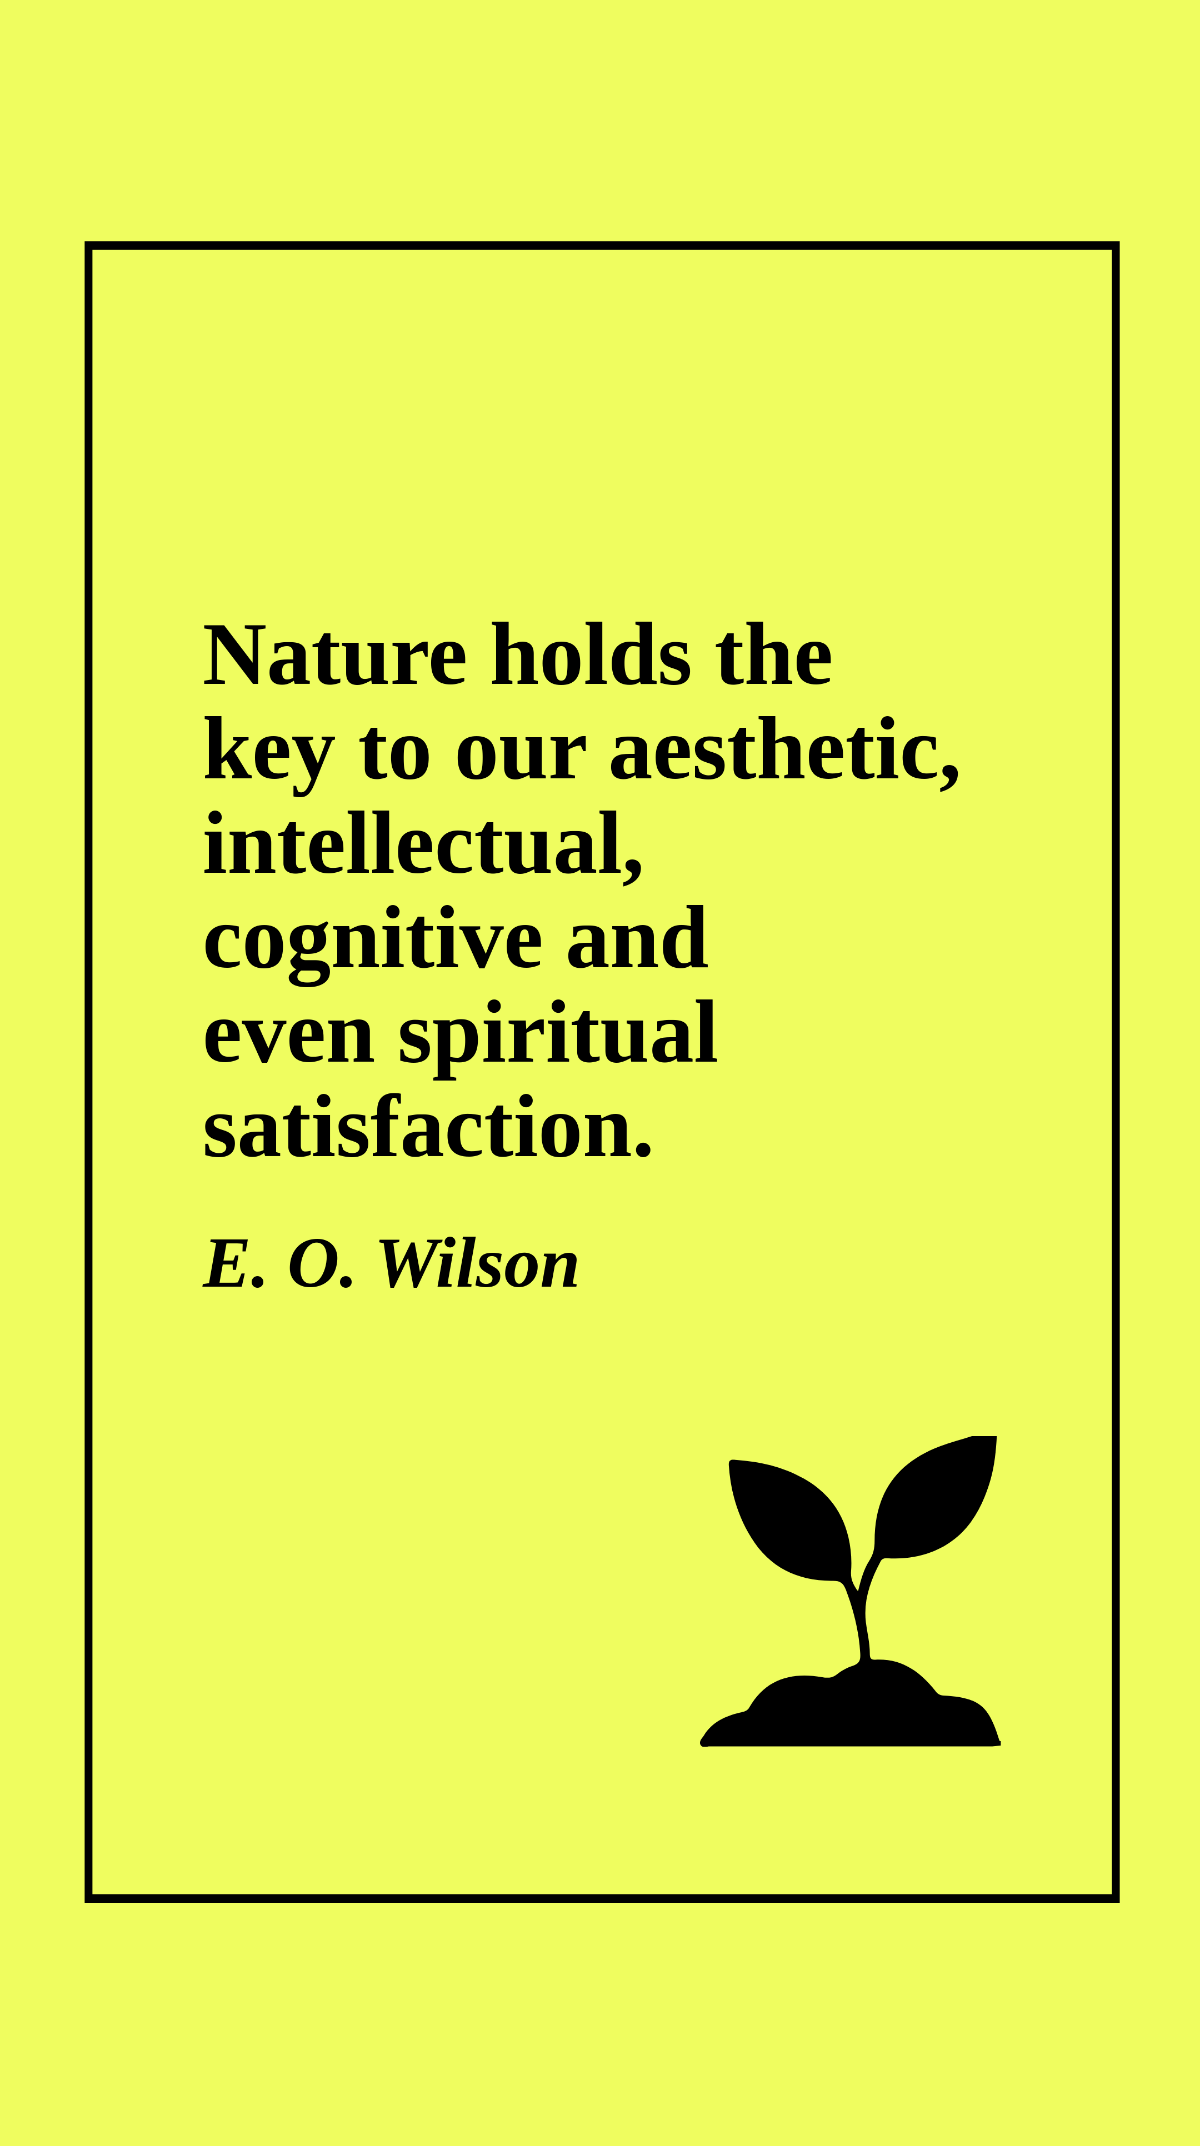 Free E. O. Wilson - Nature holds the key to our aesthetic, intellectual, cognitive and even spiritual satisfaction. Template